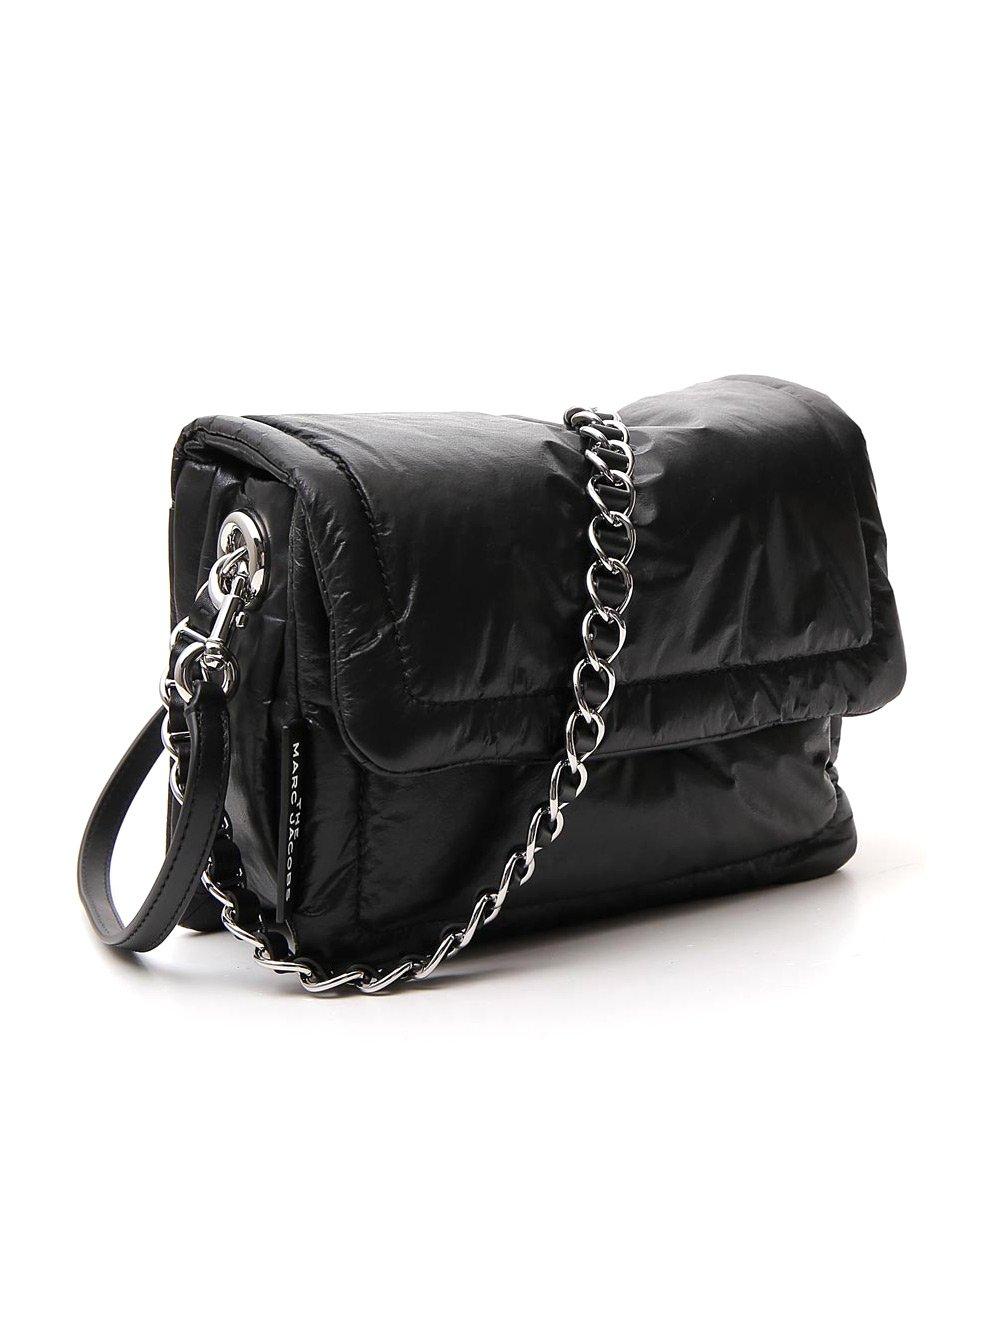 Marc Jacobs Leather The Mini Pillow Bag in Black - Save 68% - Lyst